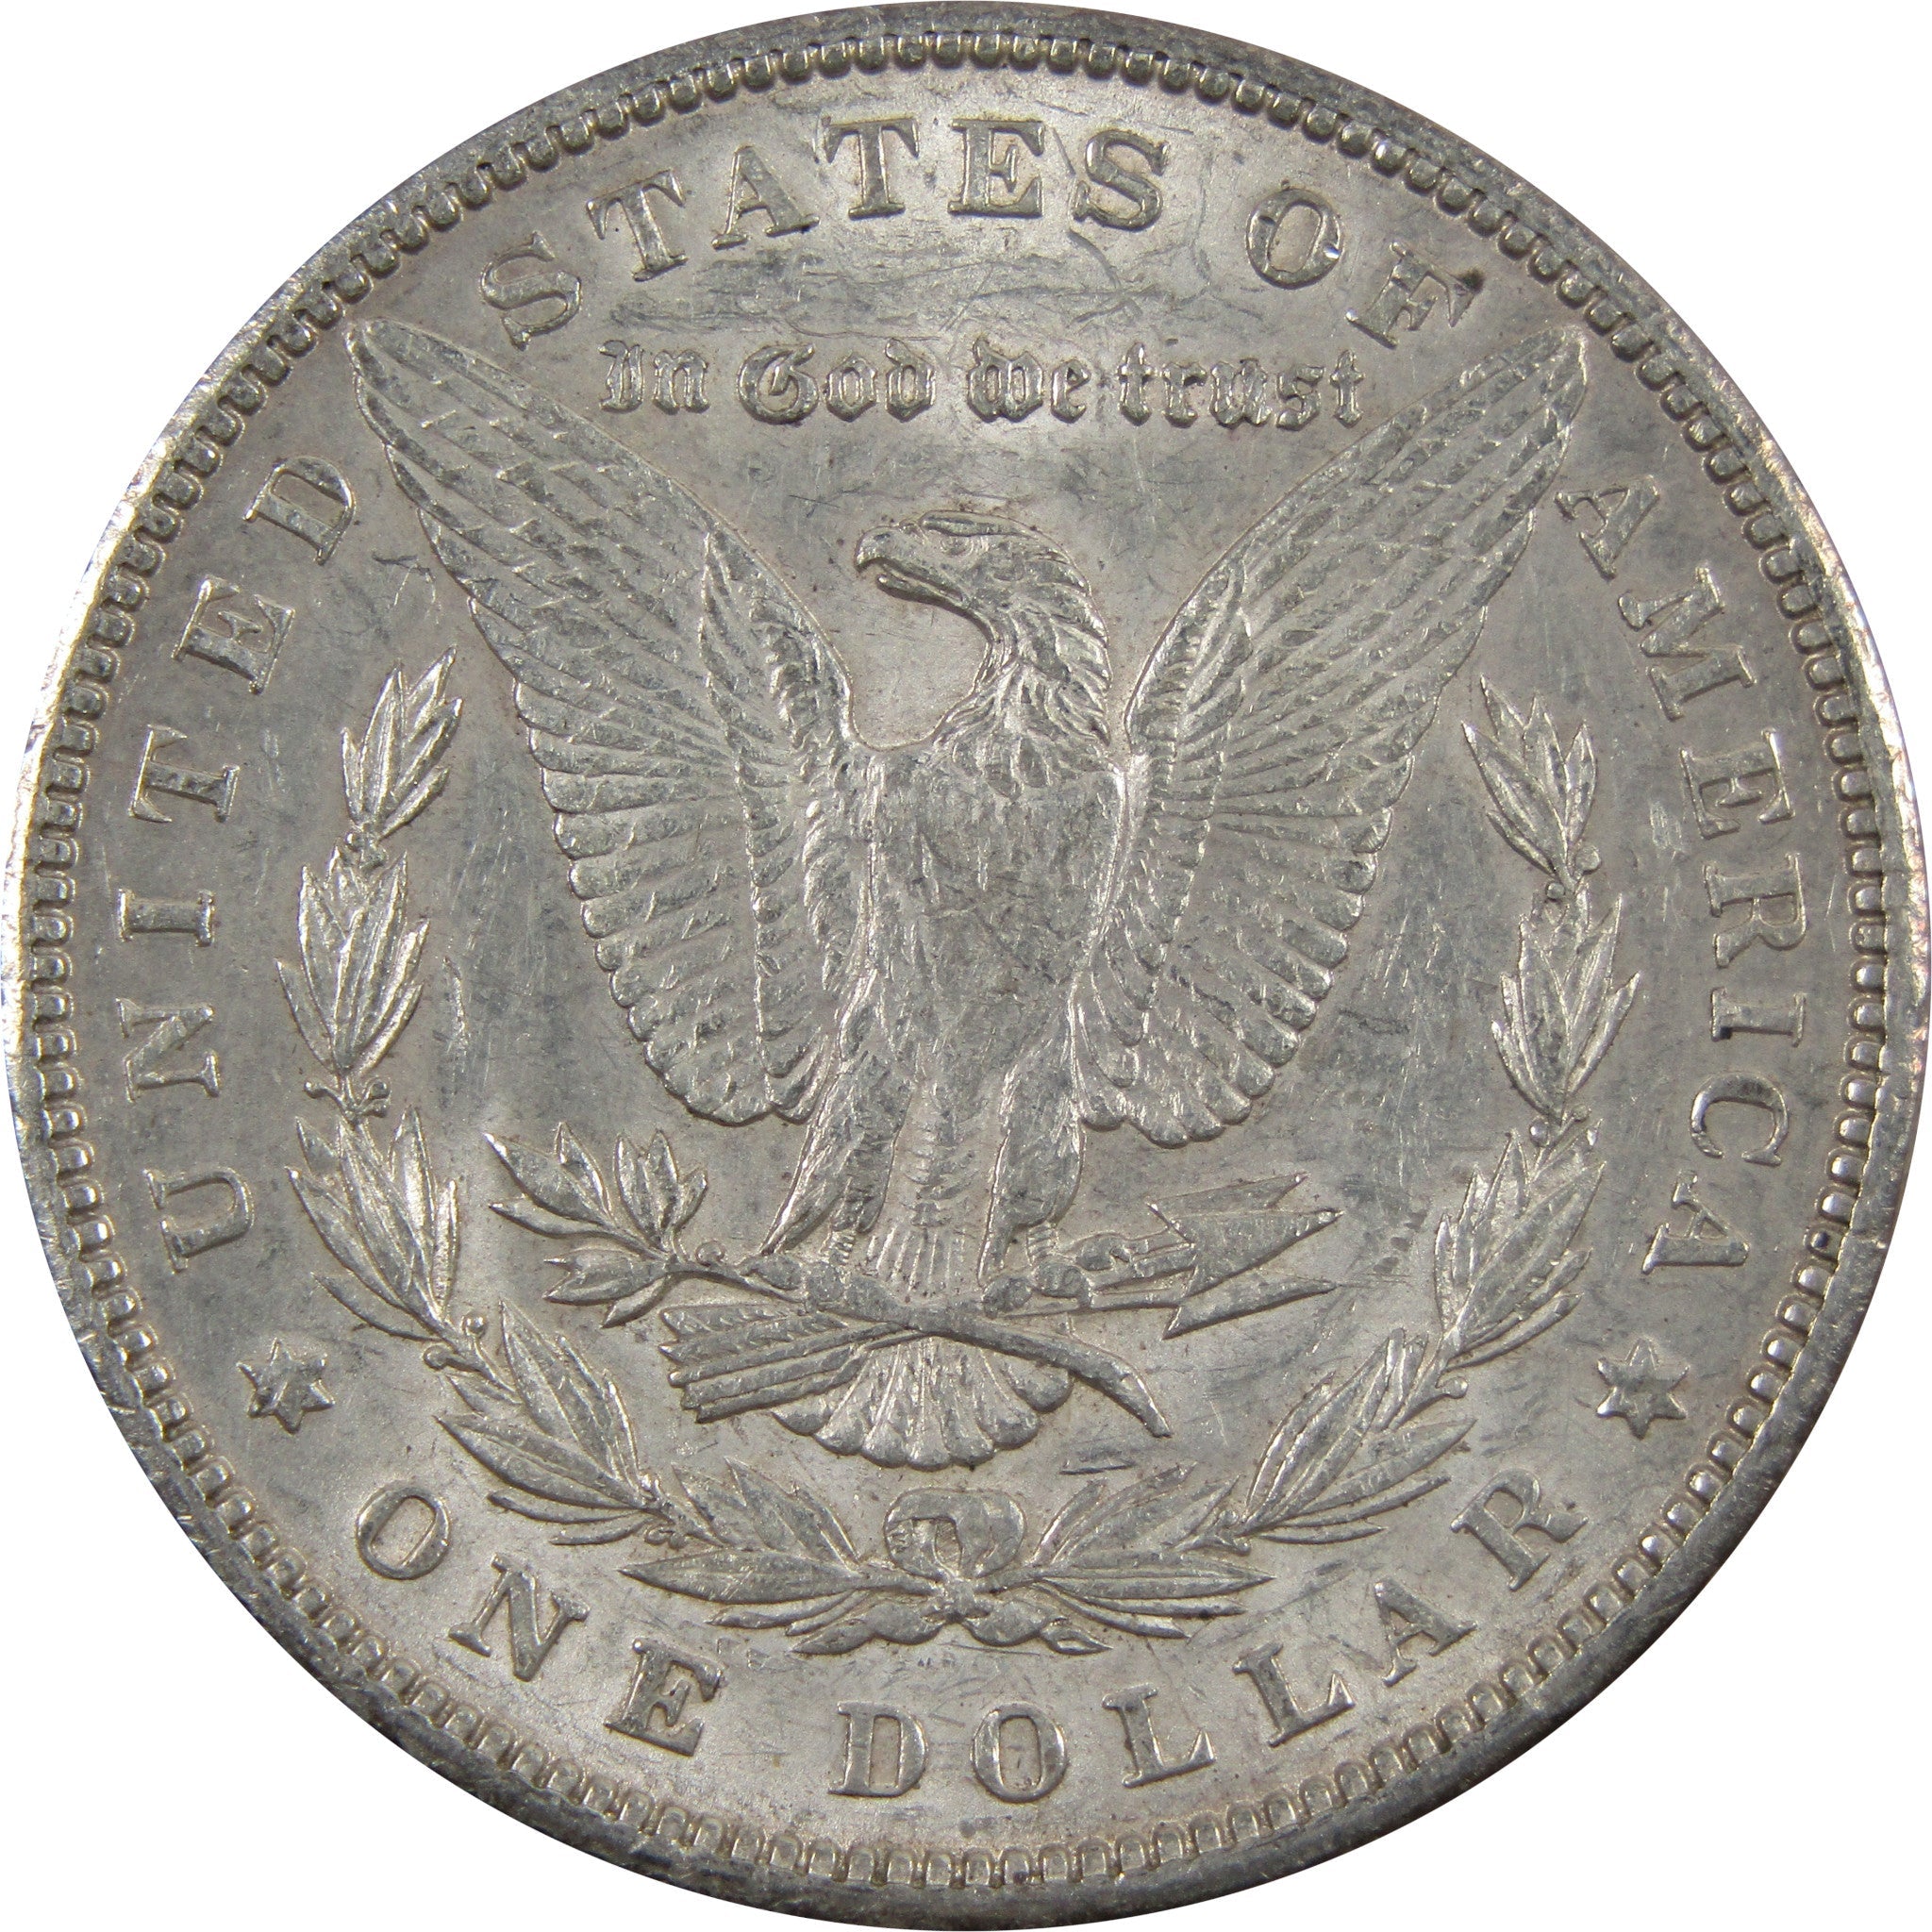 1900 Morgan Dollar AU About Uncirculated 90% Silver $1 Coin SKU:I5527 - Morgan coin - Morgan silver dollar - Morgan silver dollar for sale - Profile Coins &amp; Collectibles